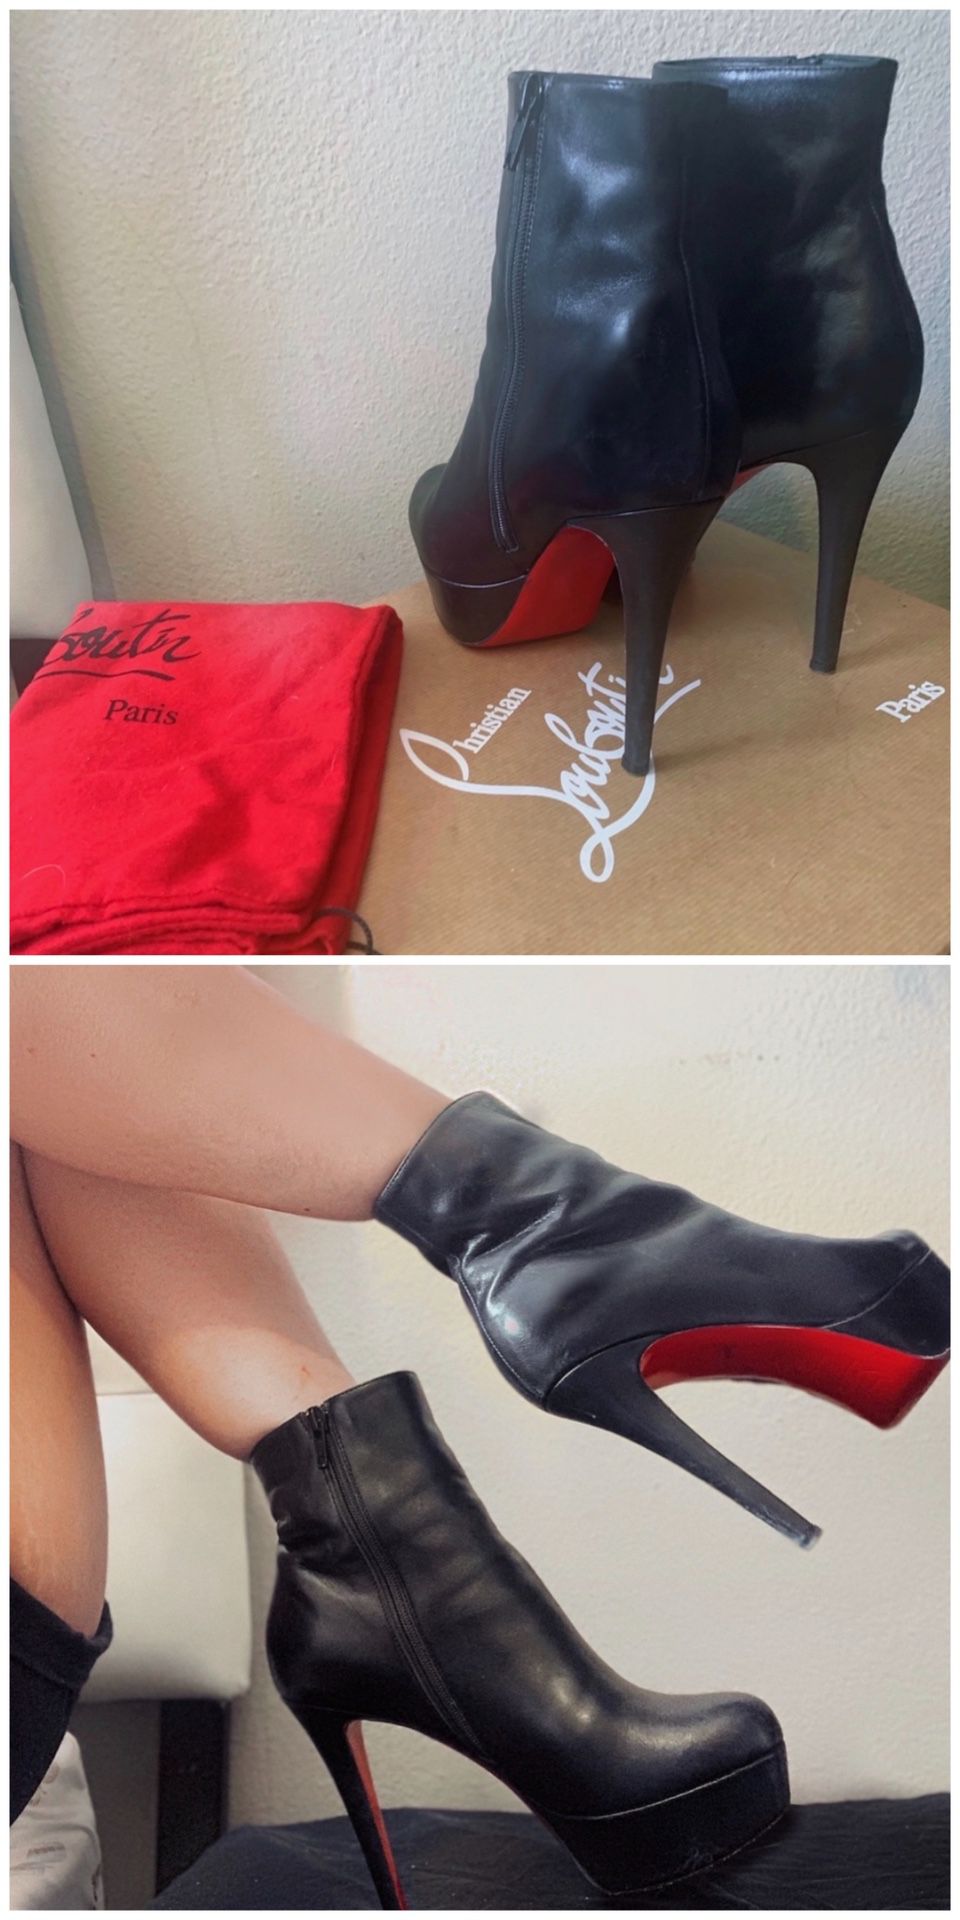 Authentic Christian Louboutin Red Bottom Bianca Heels